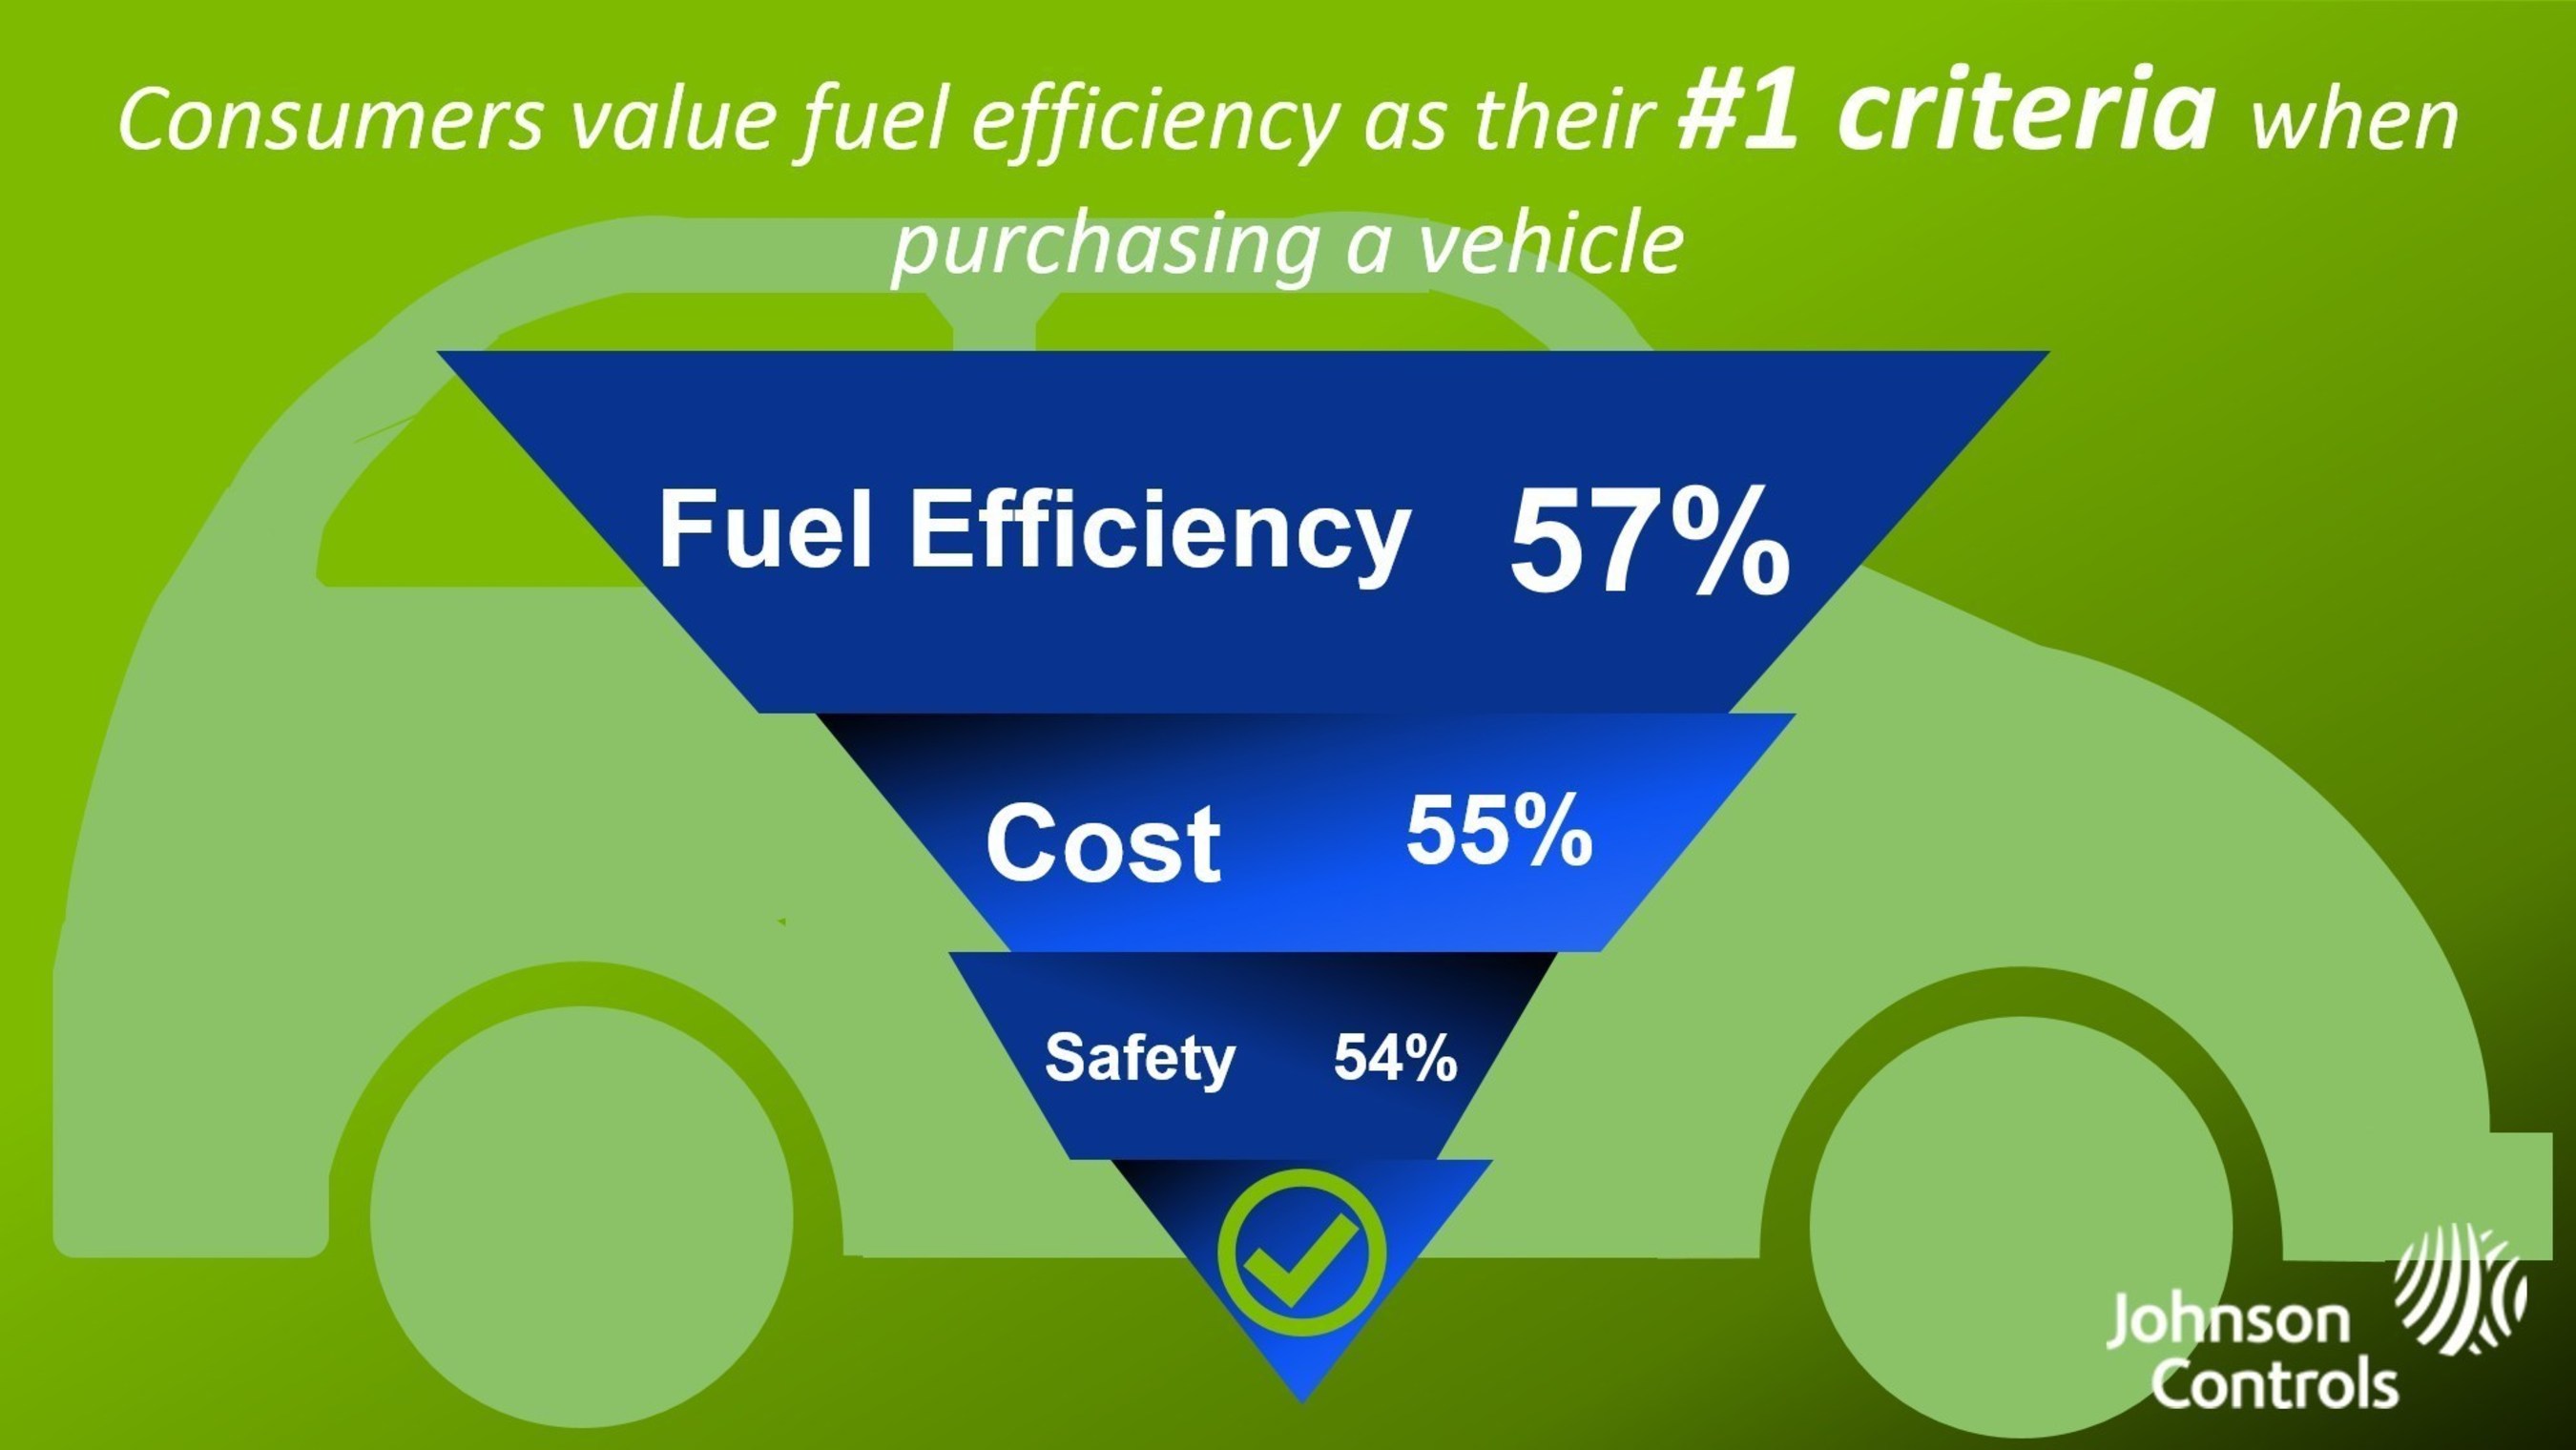 Consumers value fuel efficiency as their #1 criteria when purchasing a vehicle, according to a survey conducted by the Opinion Research Corporation on behalf of Johnson Controls.